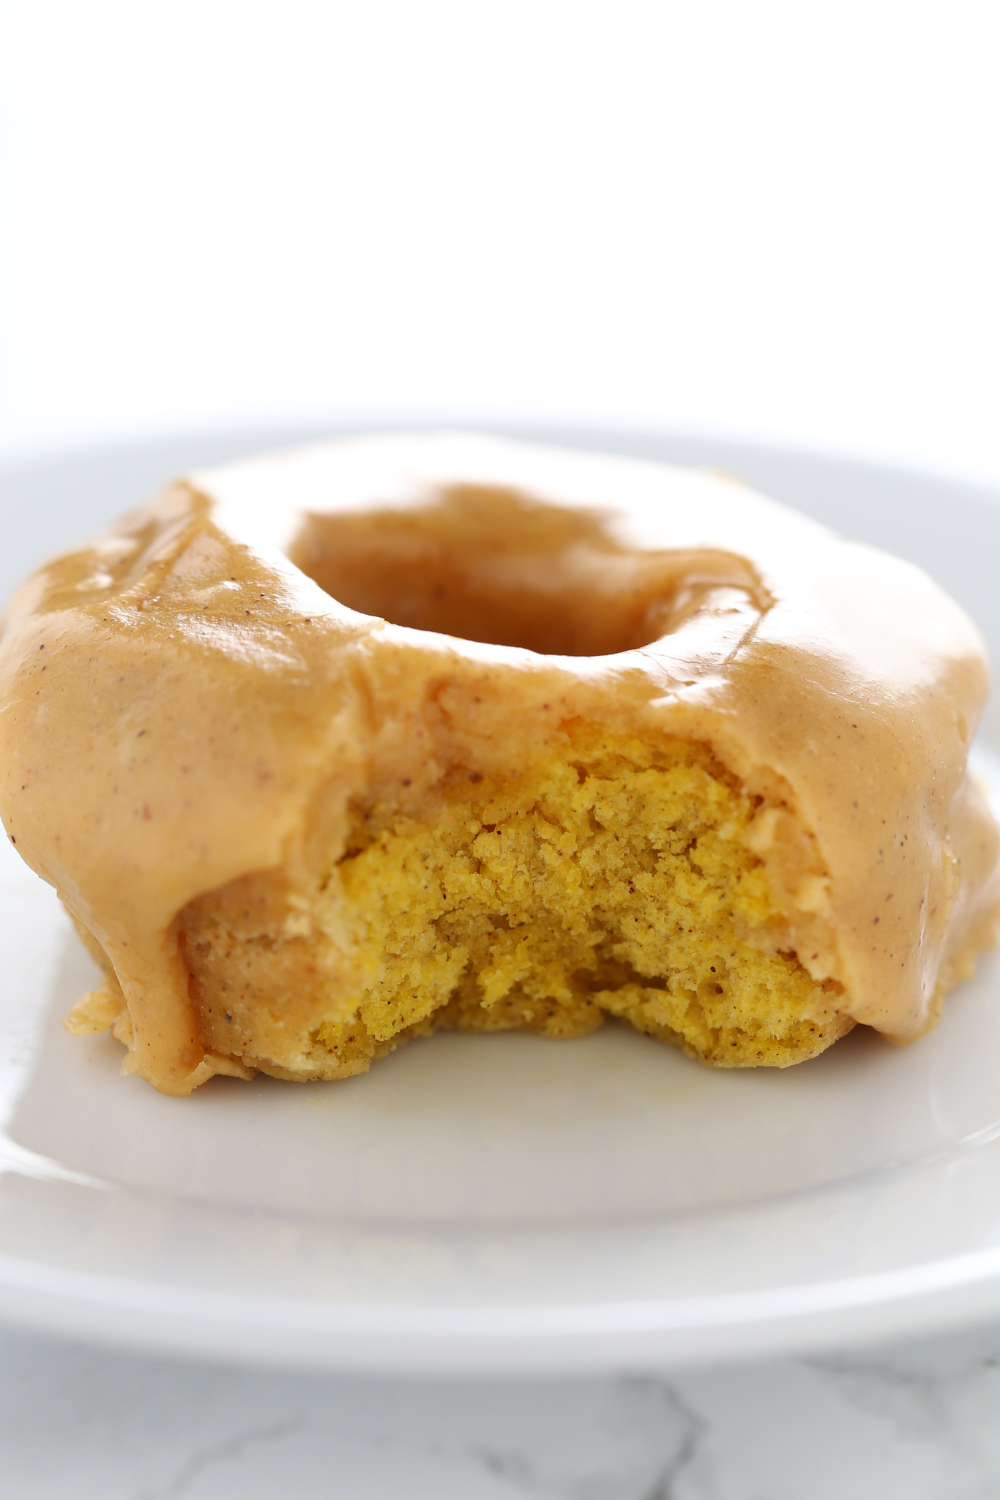 pumpkin donut topped with thick shiny pumpkin spice glaze, with a bite taken out